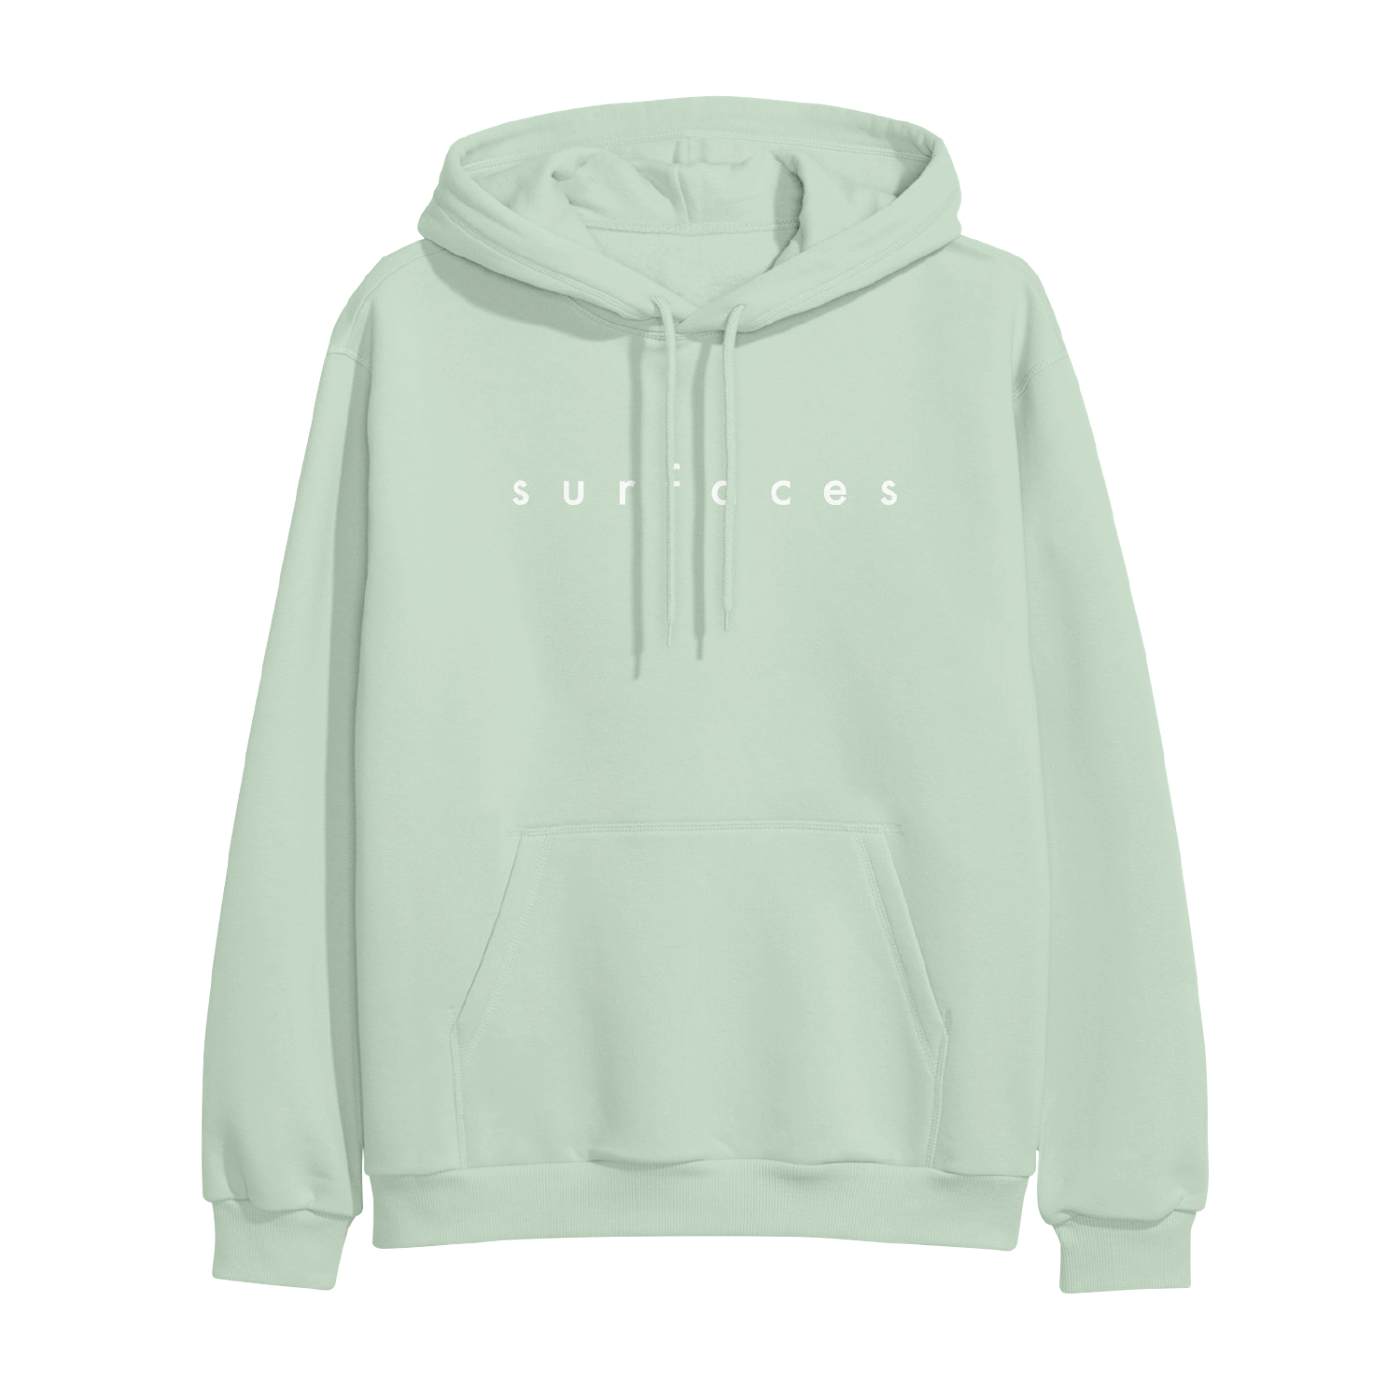 Surfaces Embroidered Logo Hoodie - Mint